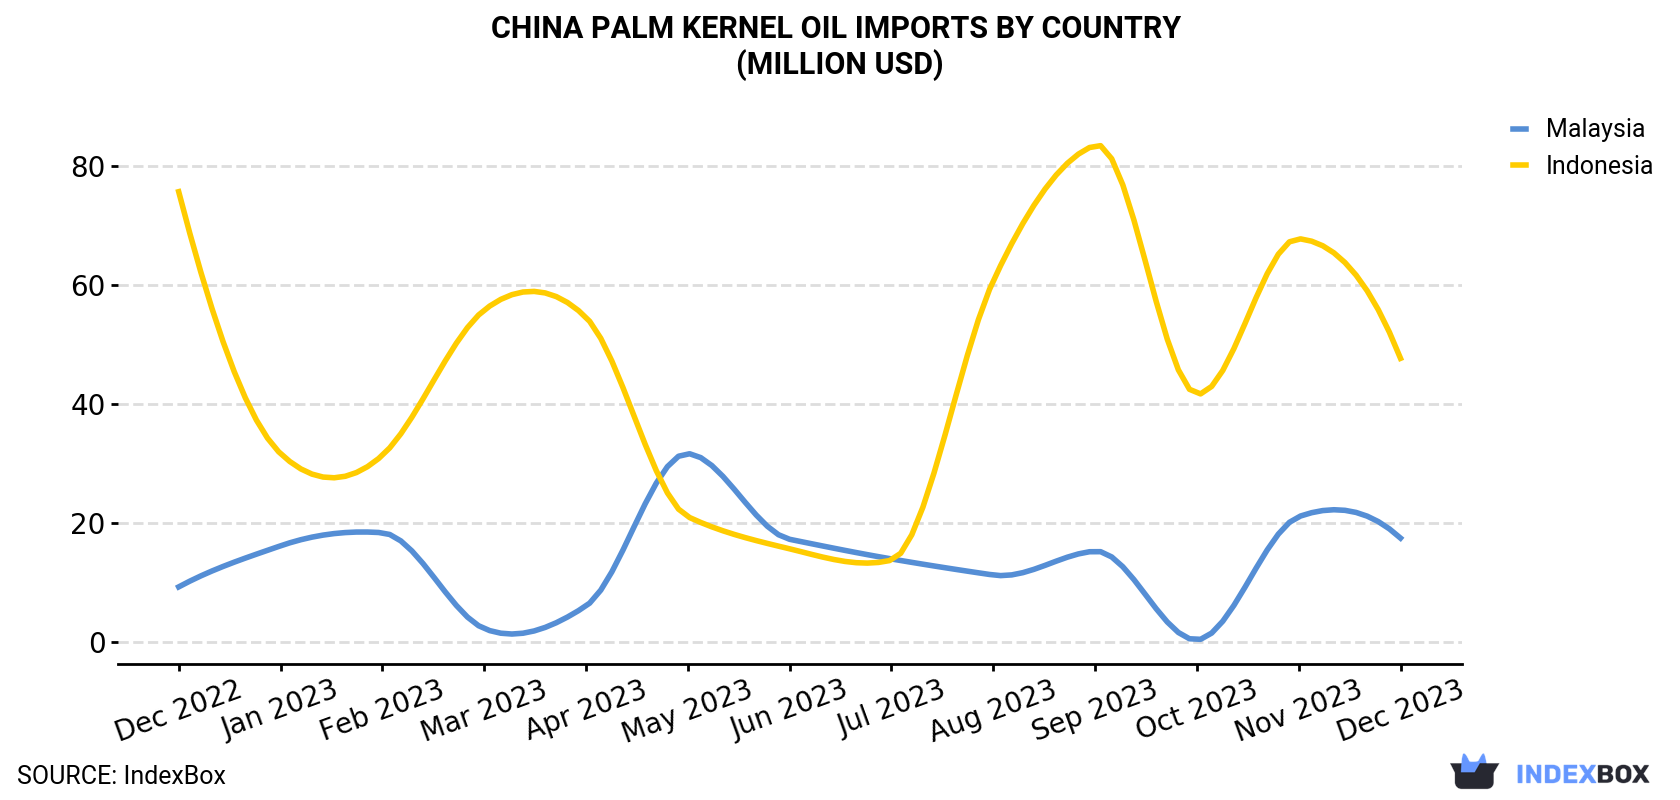 China Palm Kernel Oil Imports By Country (Million USD)